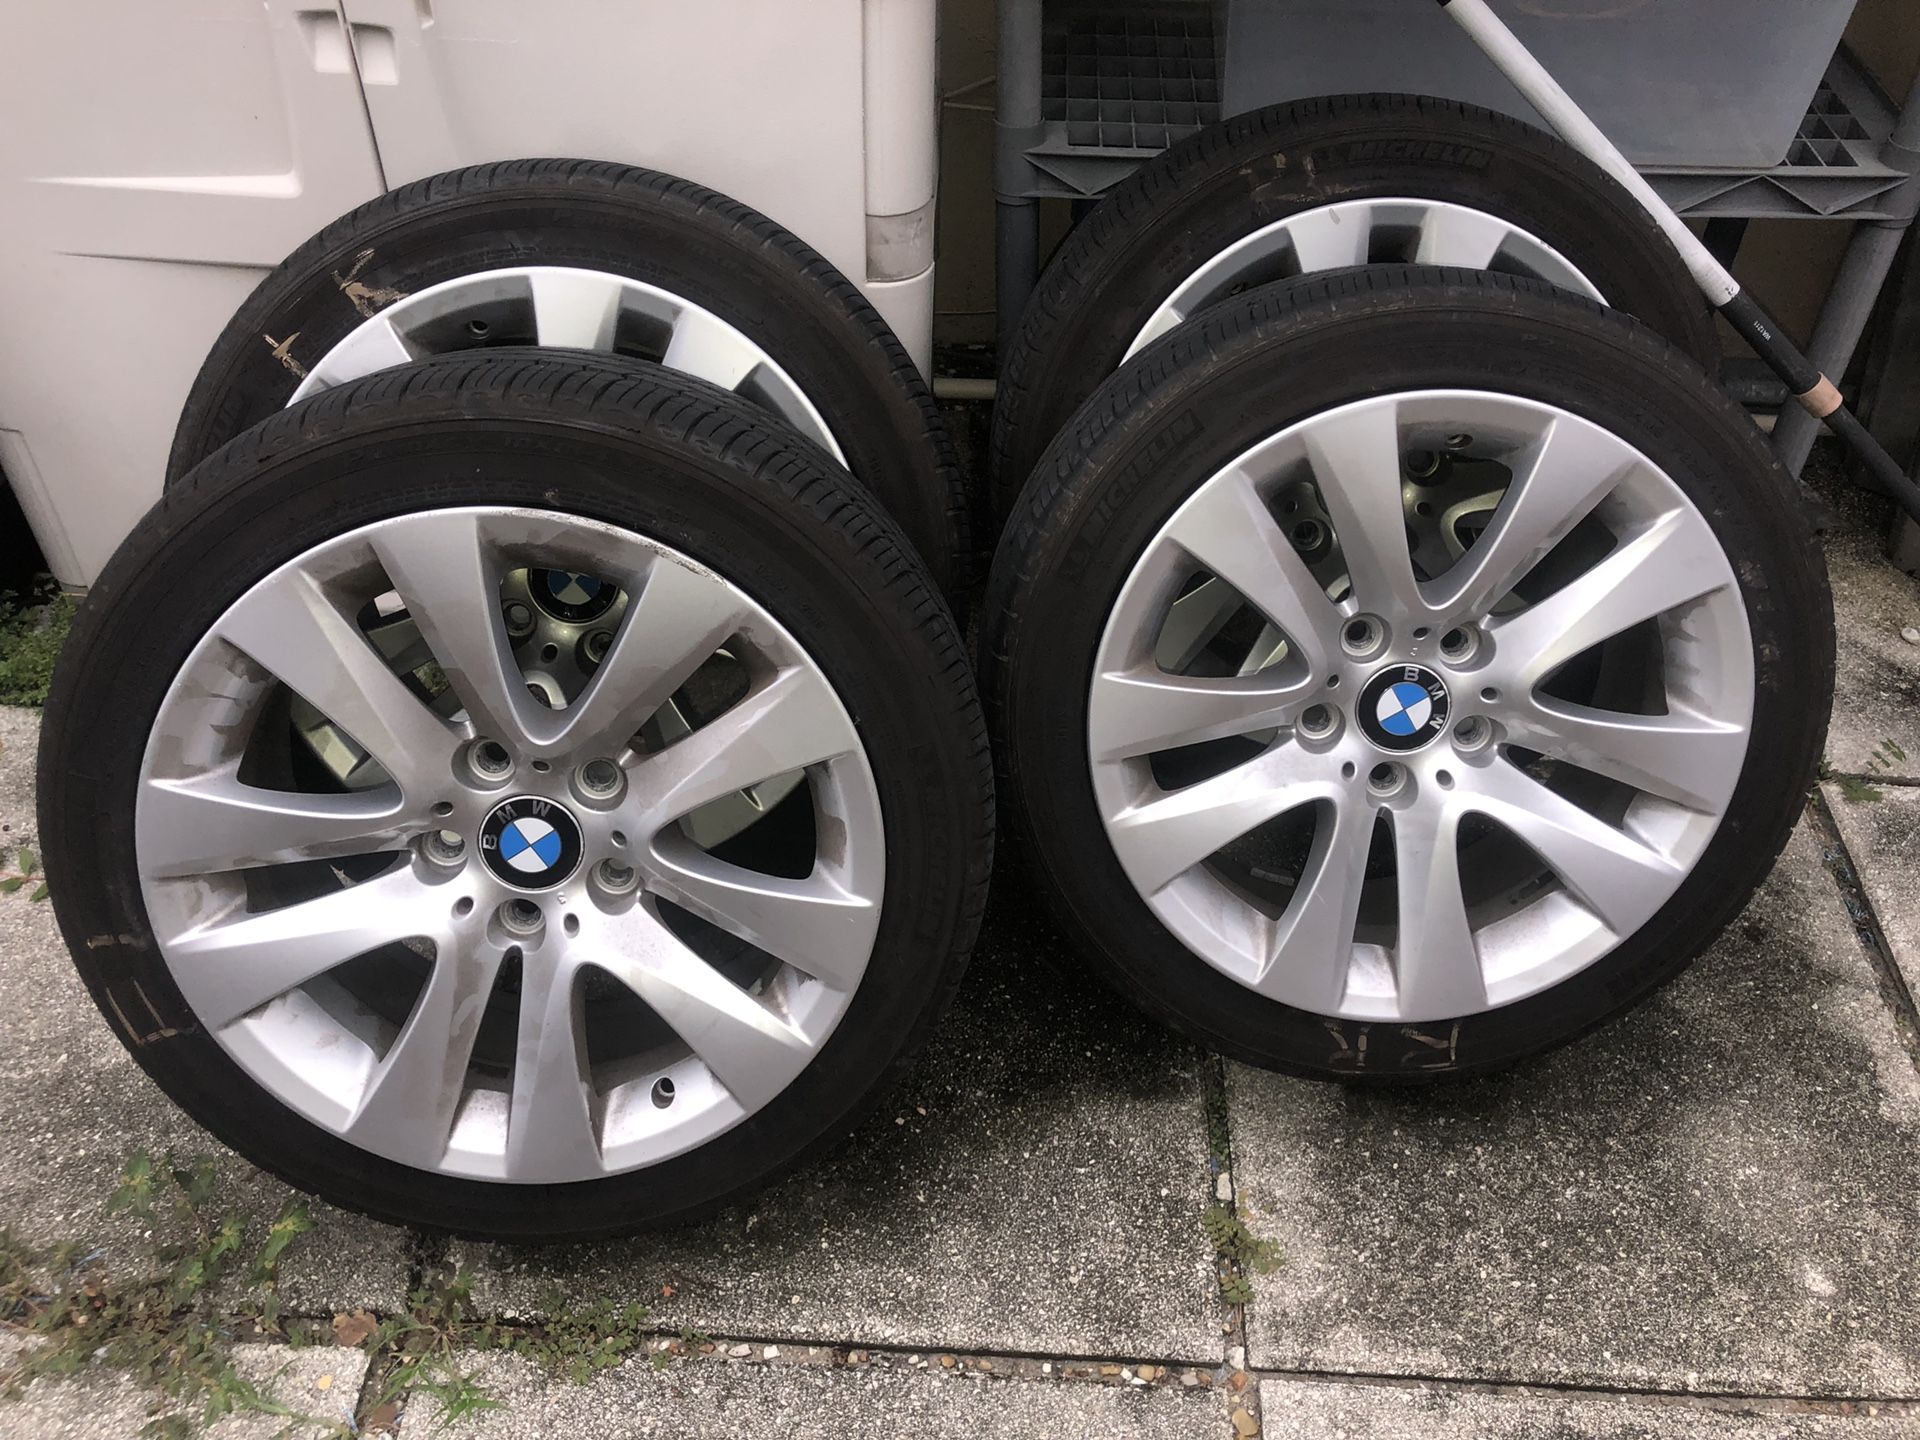 328I BMW Rims on Michelin Tires